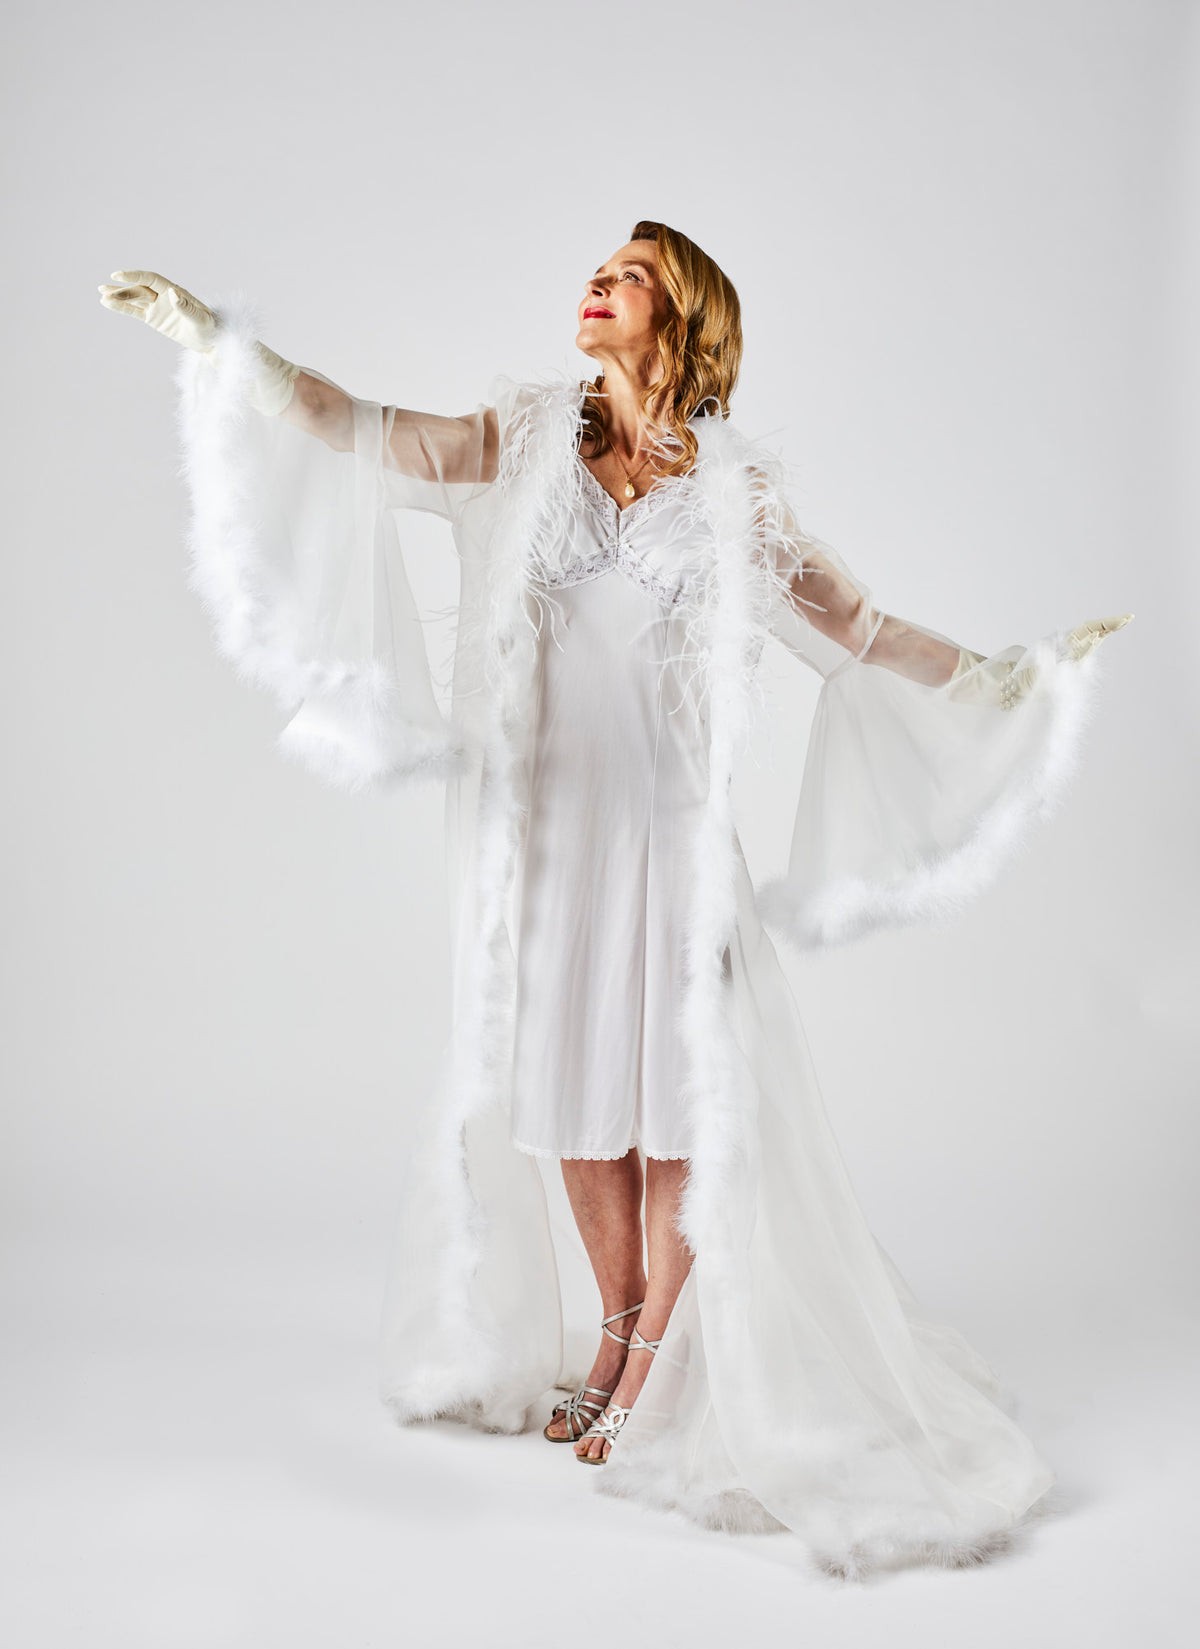 Wide angle image of wealthy woman wearing a white silk gown from video production company Enamoured Iris